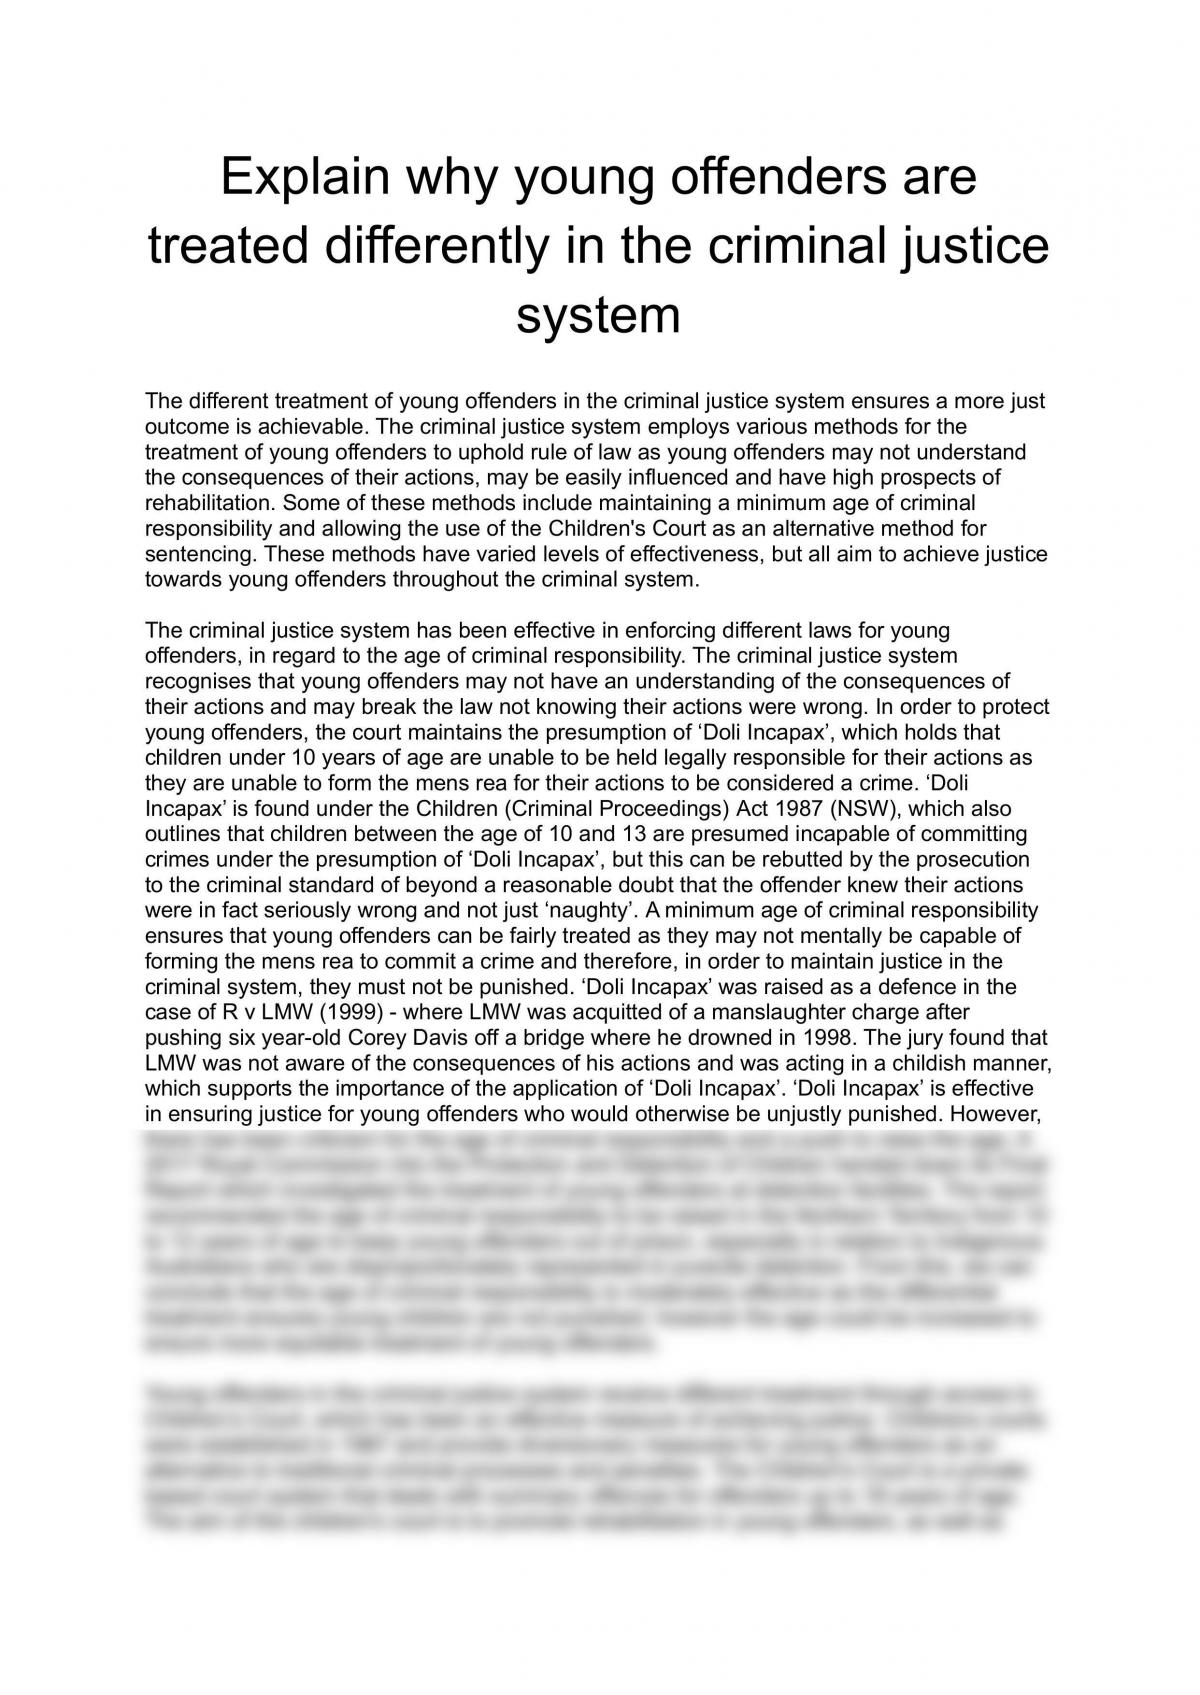 essay about juvenile offenders